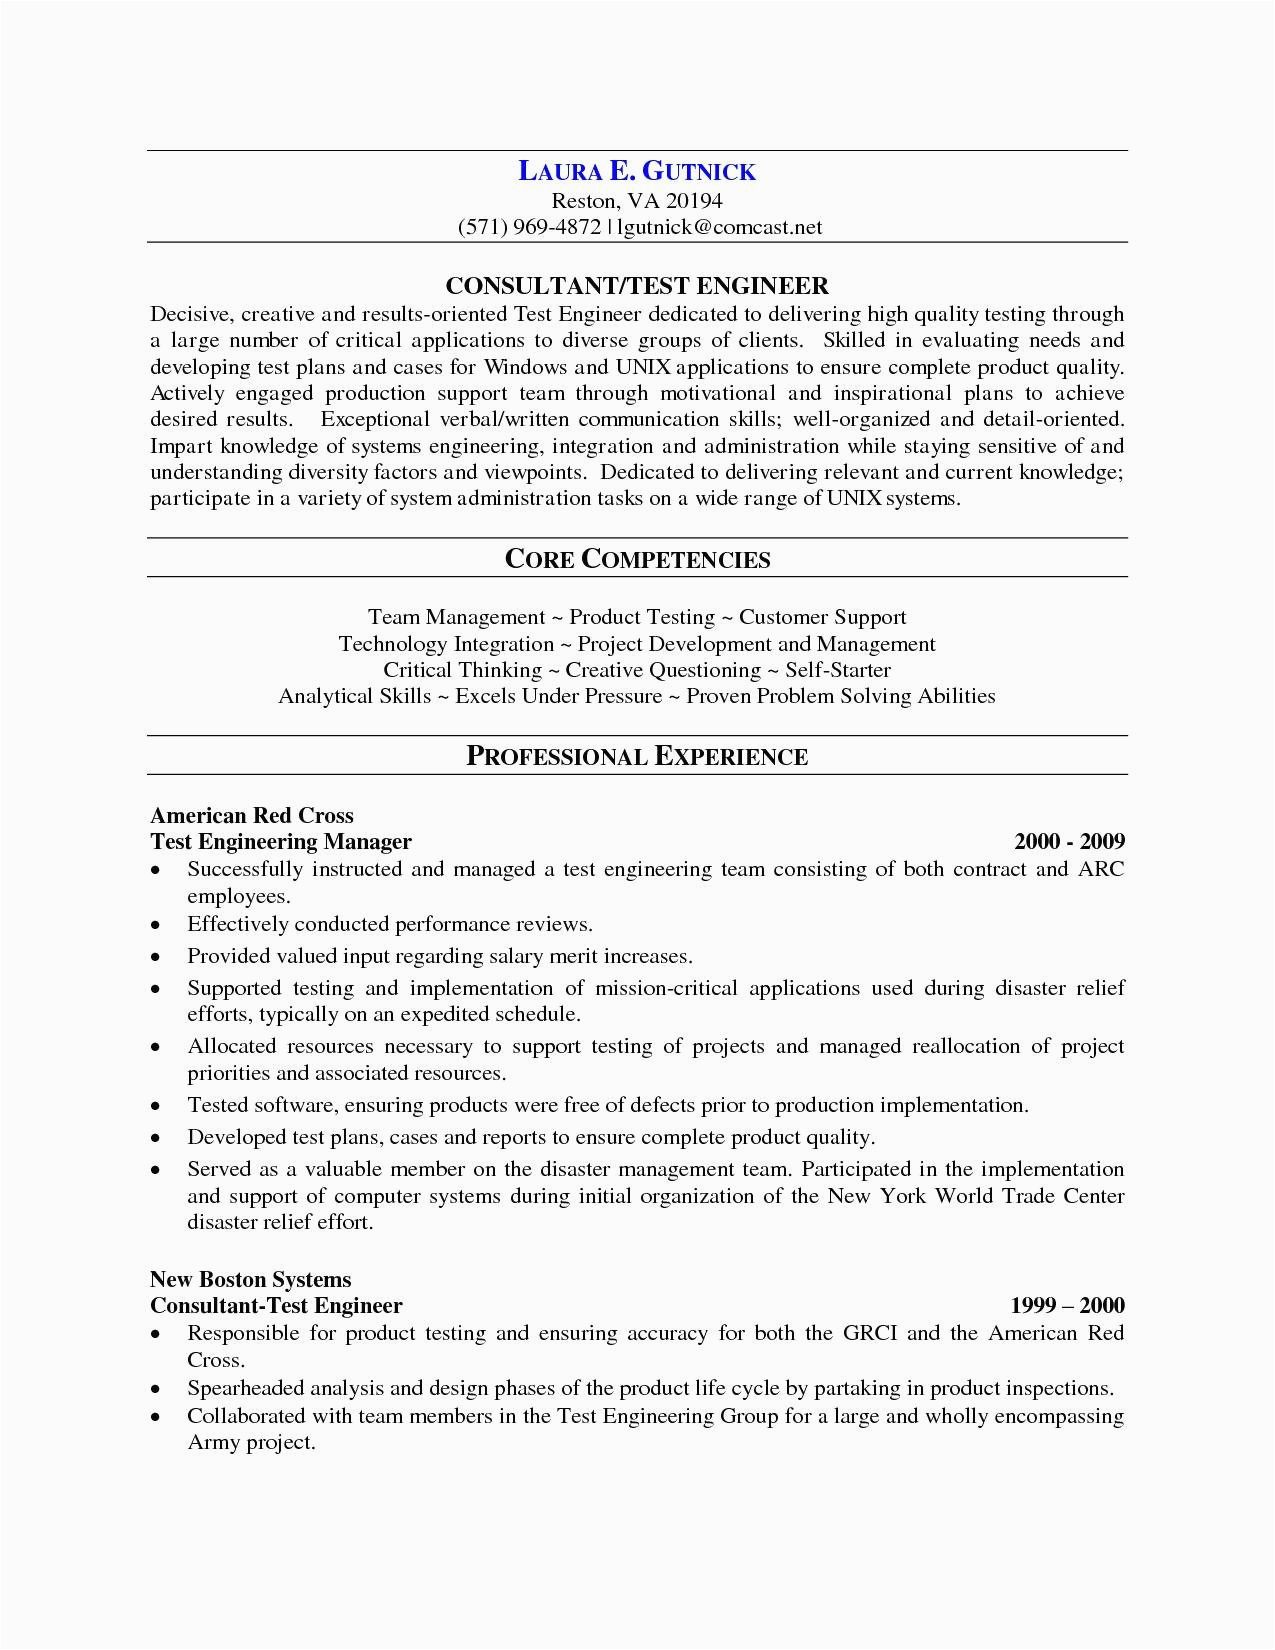 Sample Resume for 2 Years Experience Sample Resume for software Tester 2 Years Experience